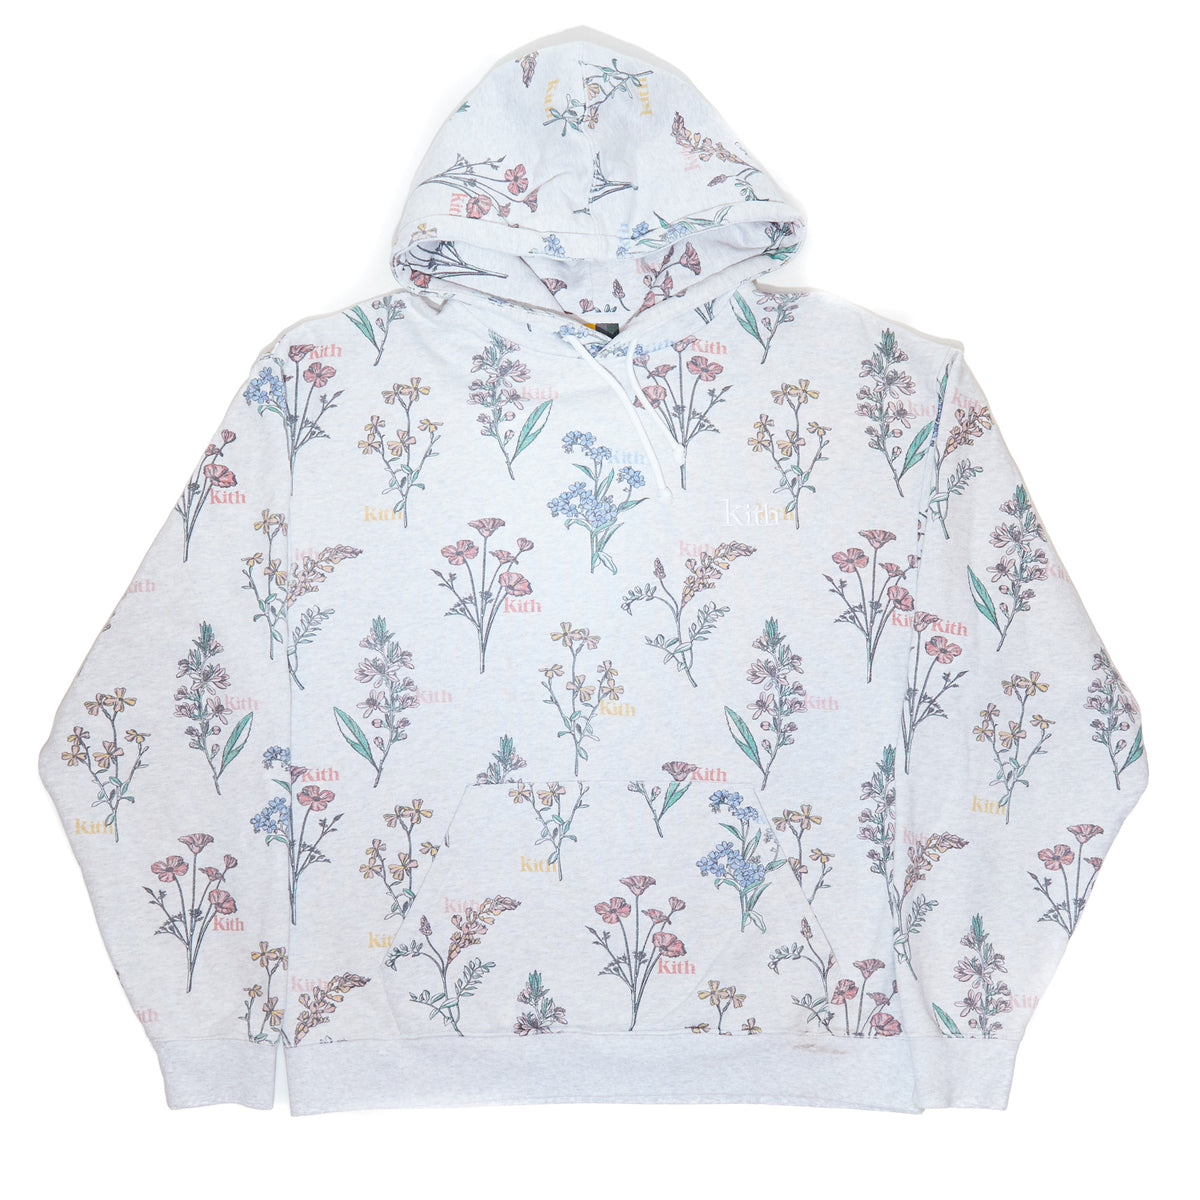 Kith Botanical Floral Williams lll Hoodie – Closet Tours